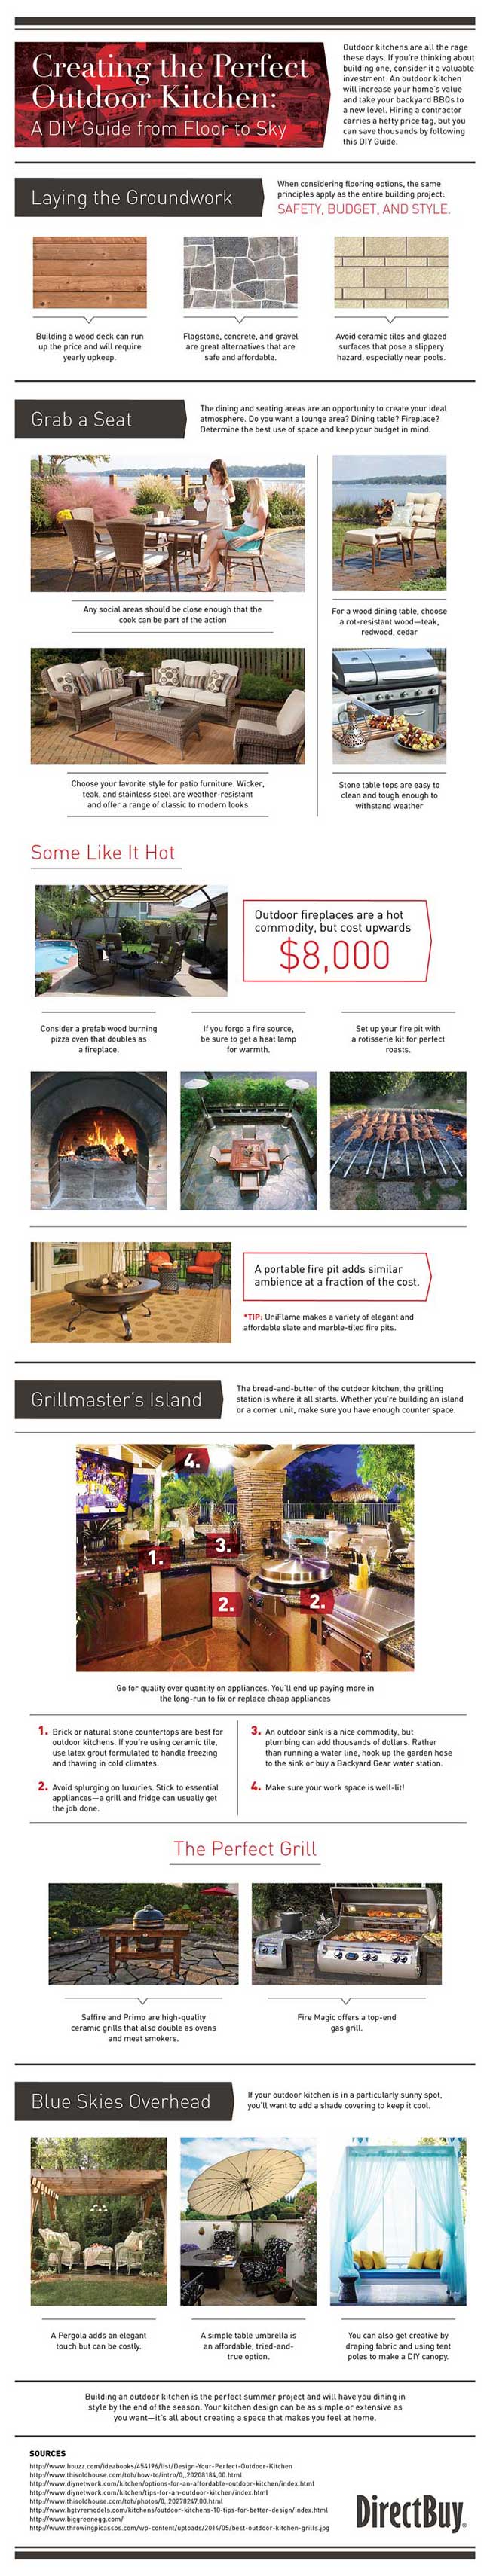 Infographic - Creating the Perfect Outdoor Kitchen